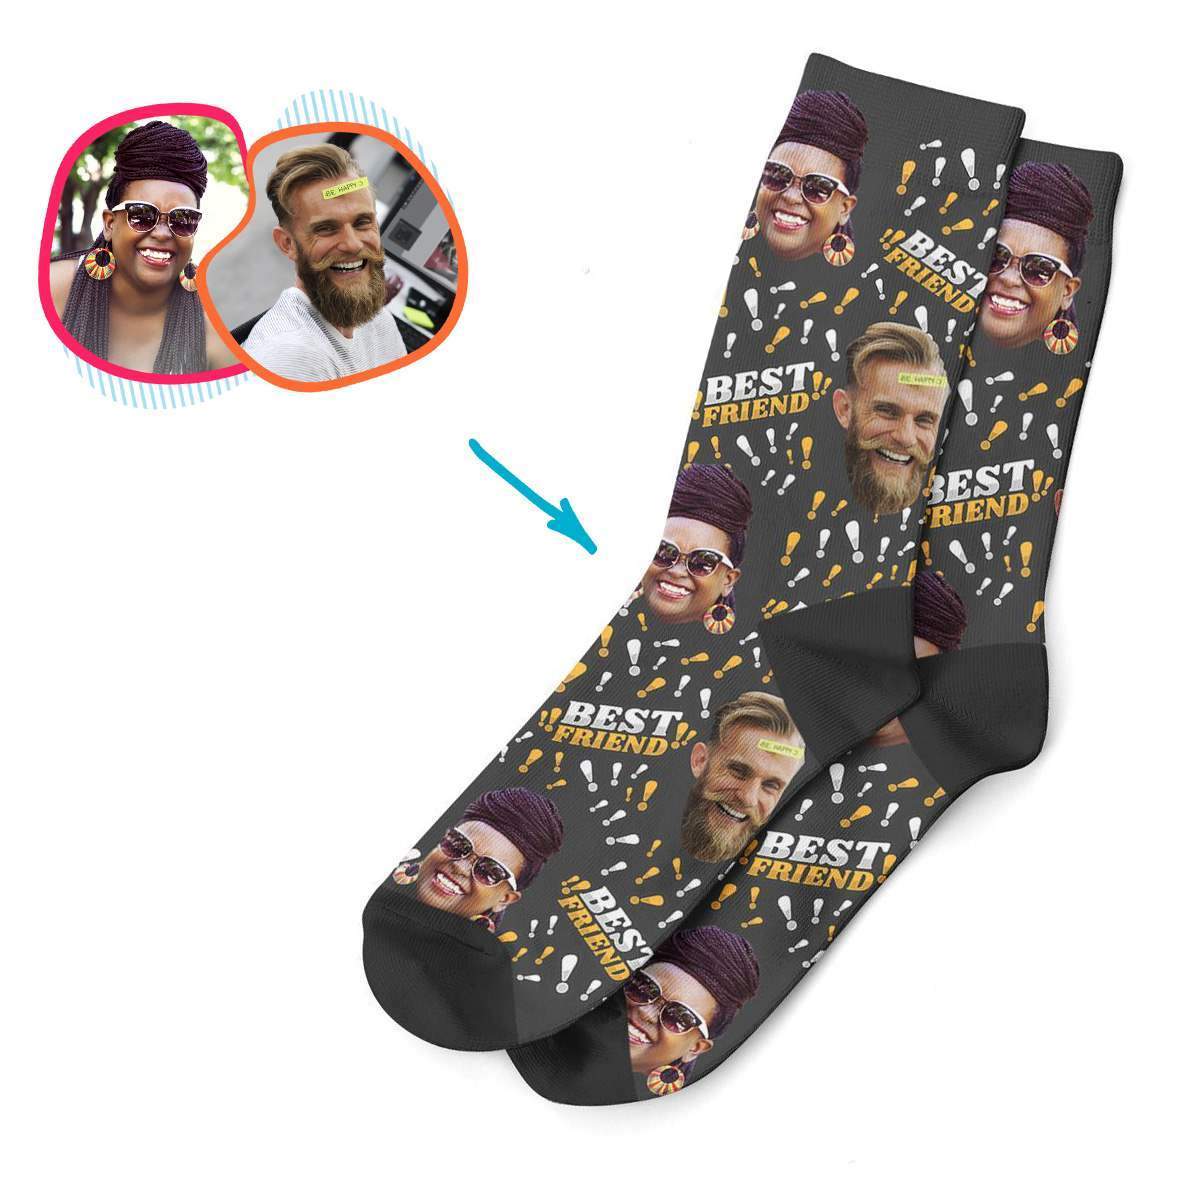 dark Best Friend socks personalized with photo of face printed on them